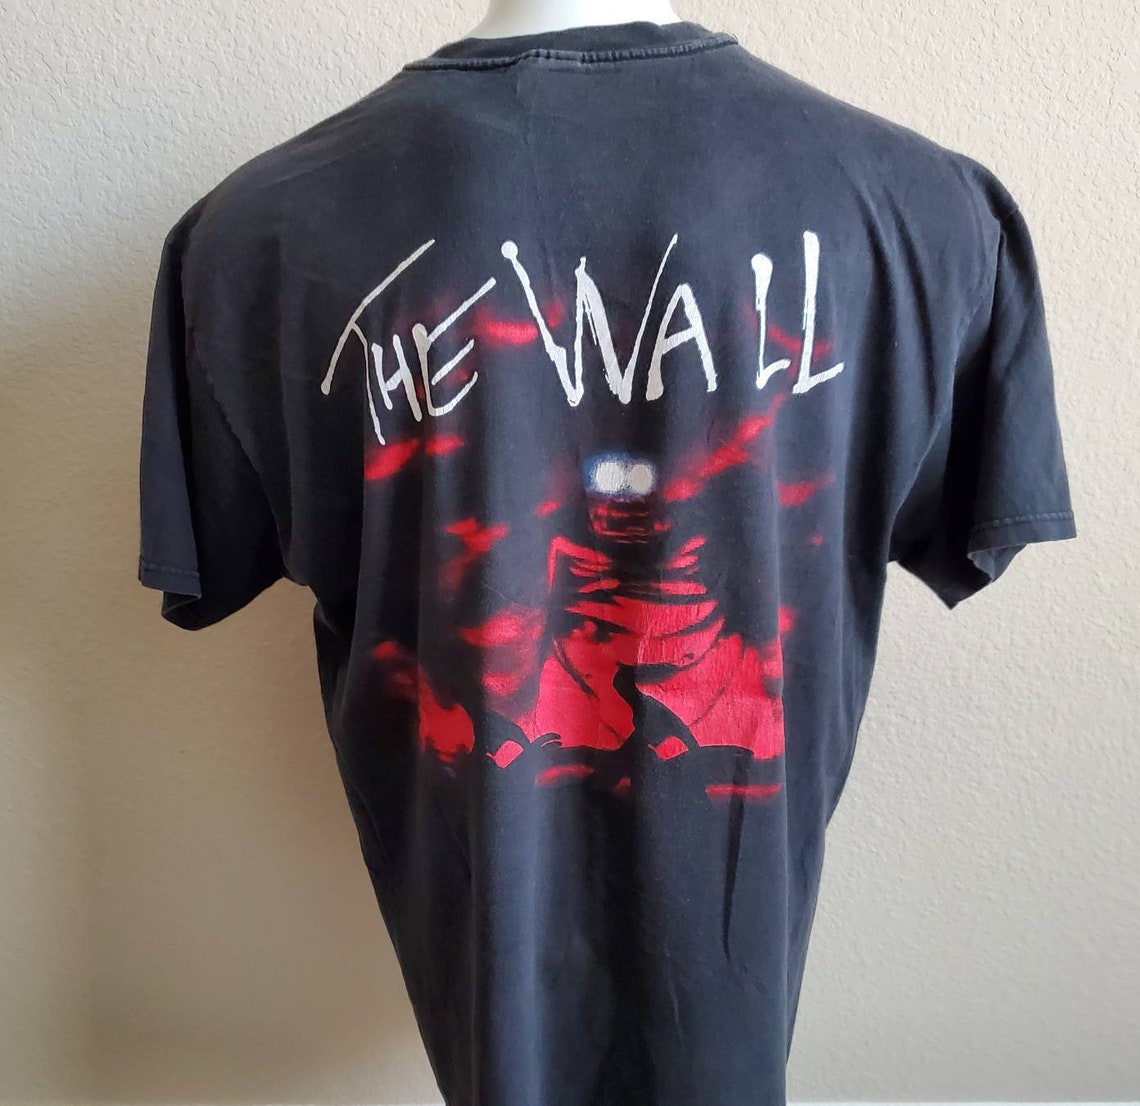 Vintage 90s Pink Floyd Rock Band The Wall Music Concert Tour | Etsy